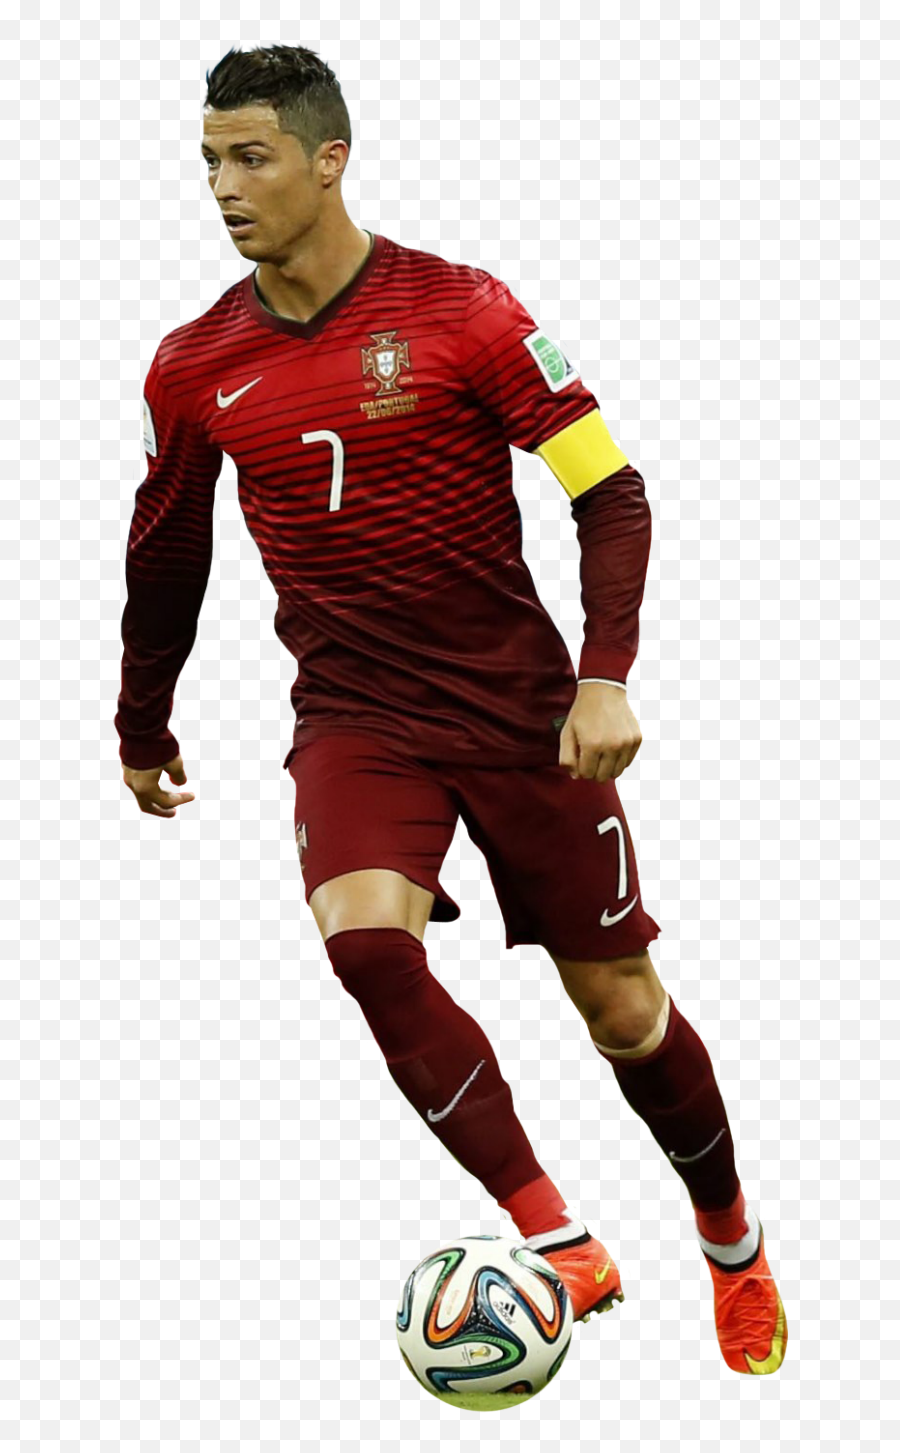 Download Real Cristiano Portugal Messi Madrid Ronaldo - Cristiano Ronaldo Portugal Fc Png,Football Clipart Png